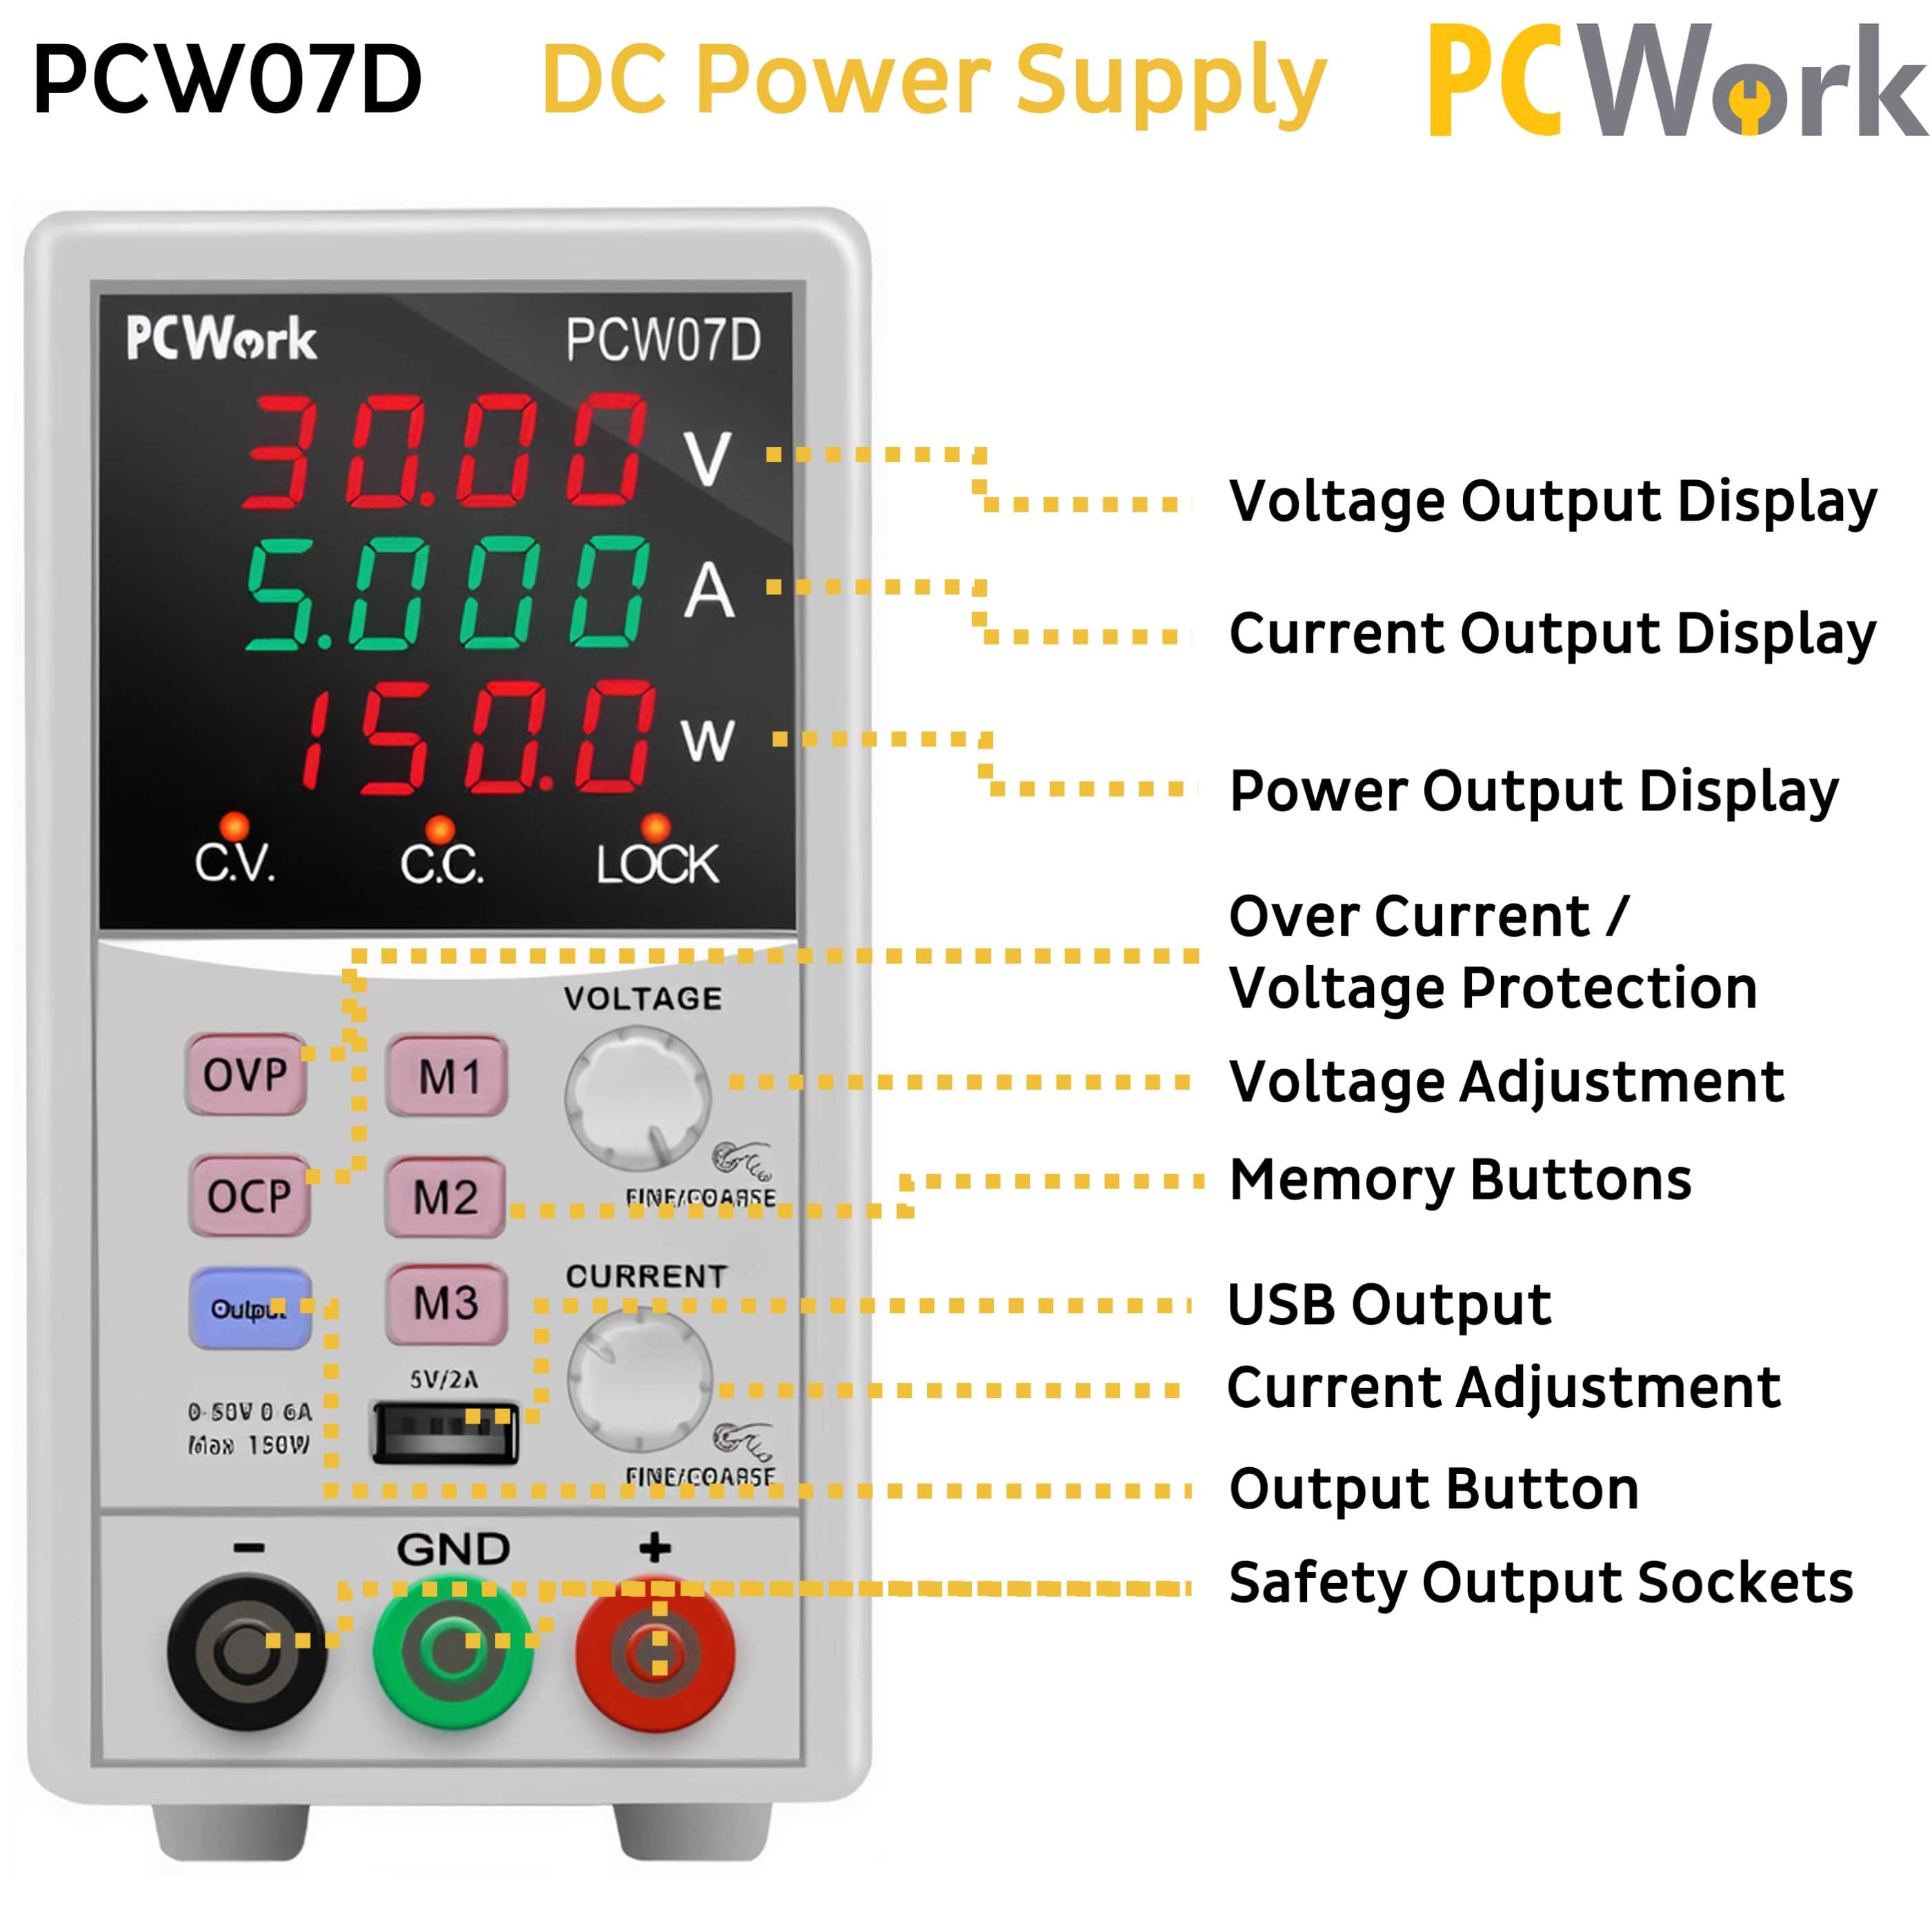 PCW07D Laboratory switching power supply, DC, 0-50V, 0-6A